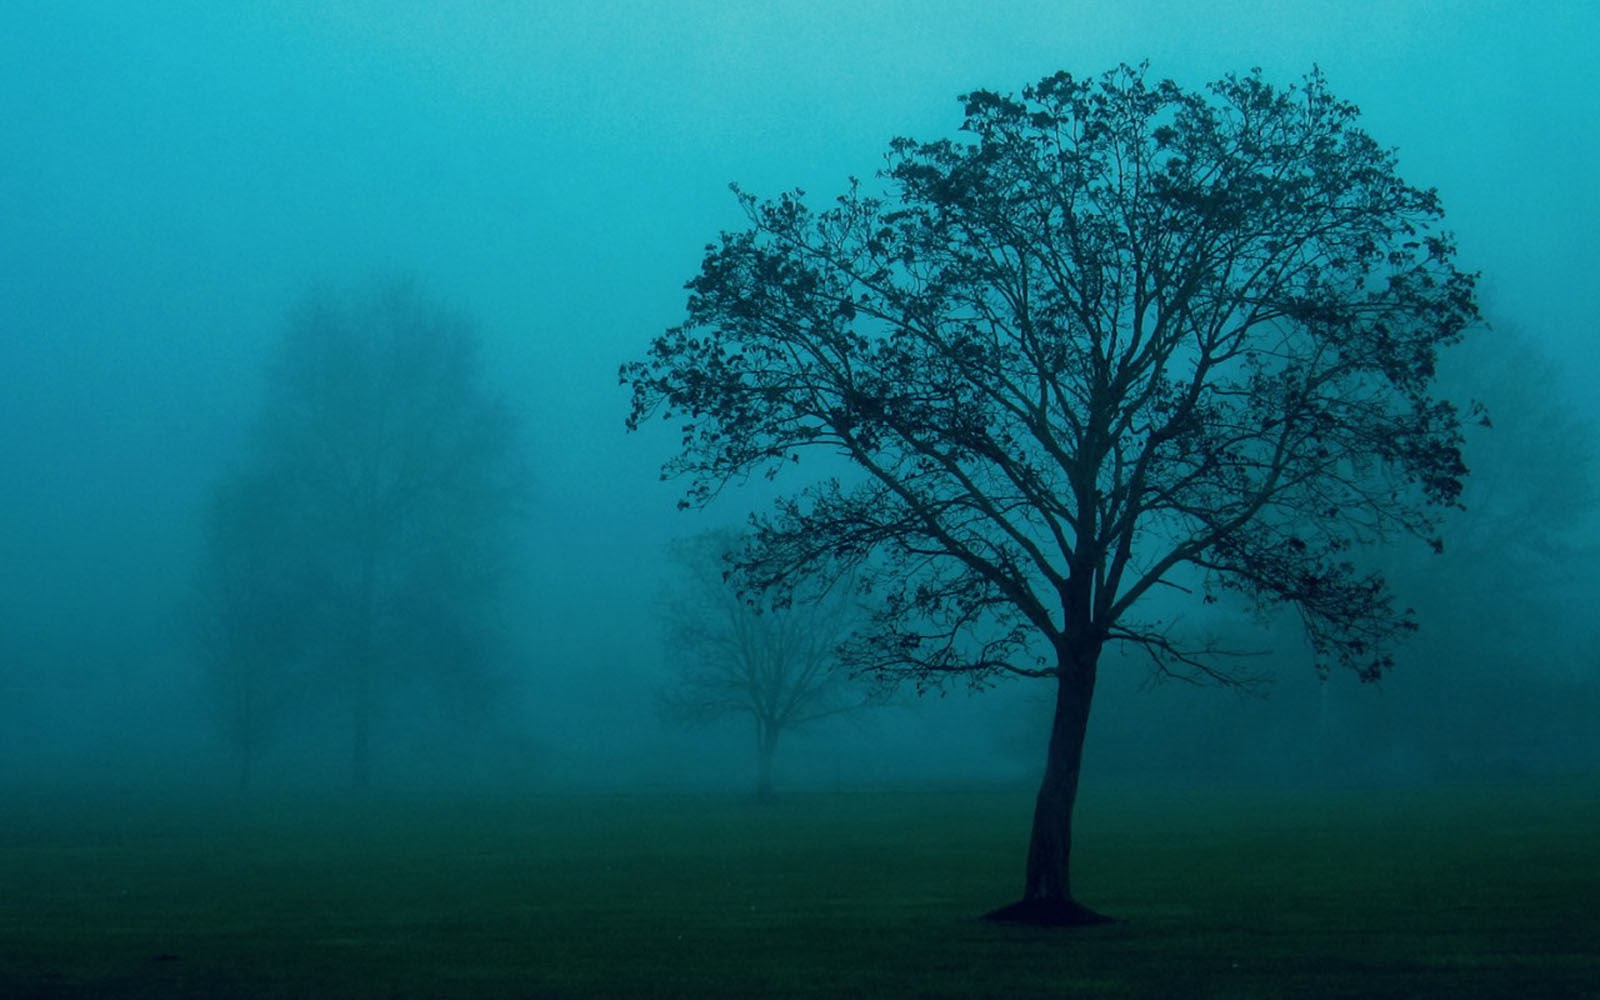 Trees In The Mist